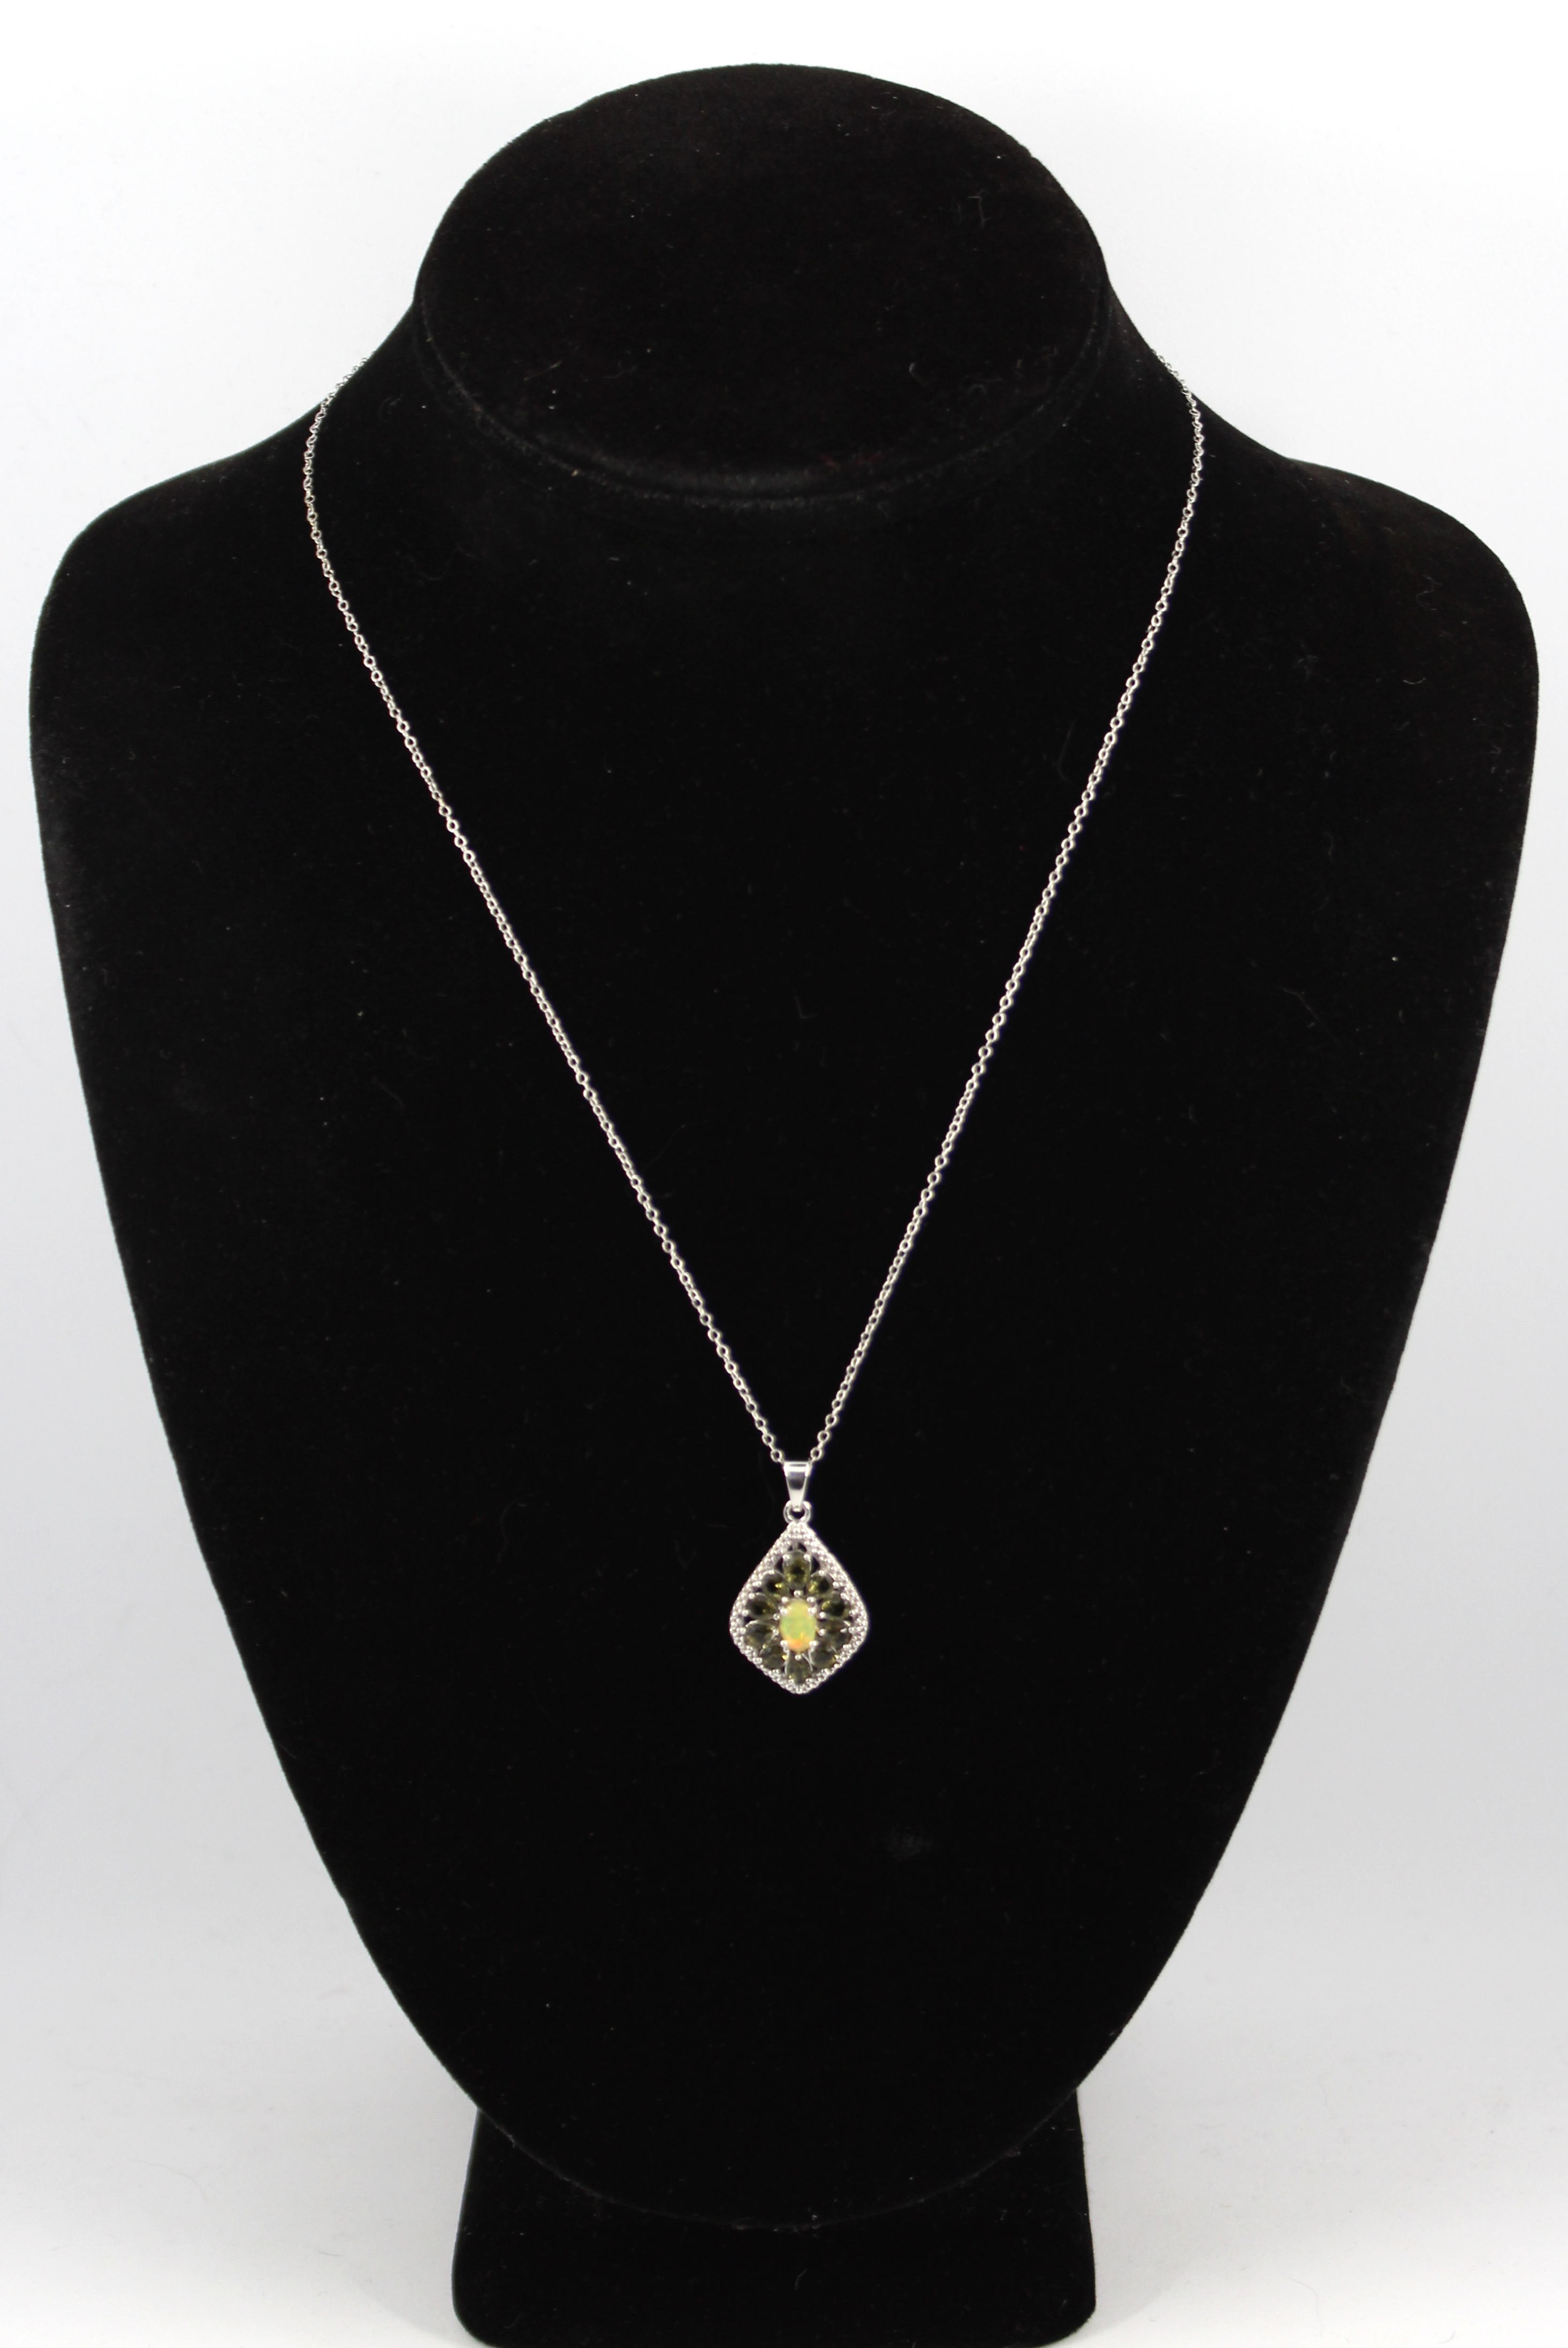 SILVER OPAL AND TOURMALINE NECKLACE 3c491d